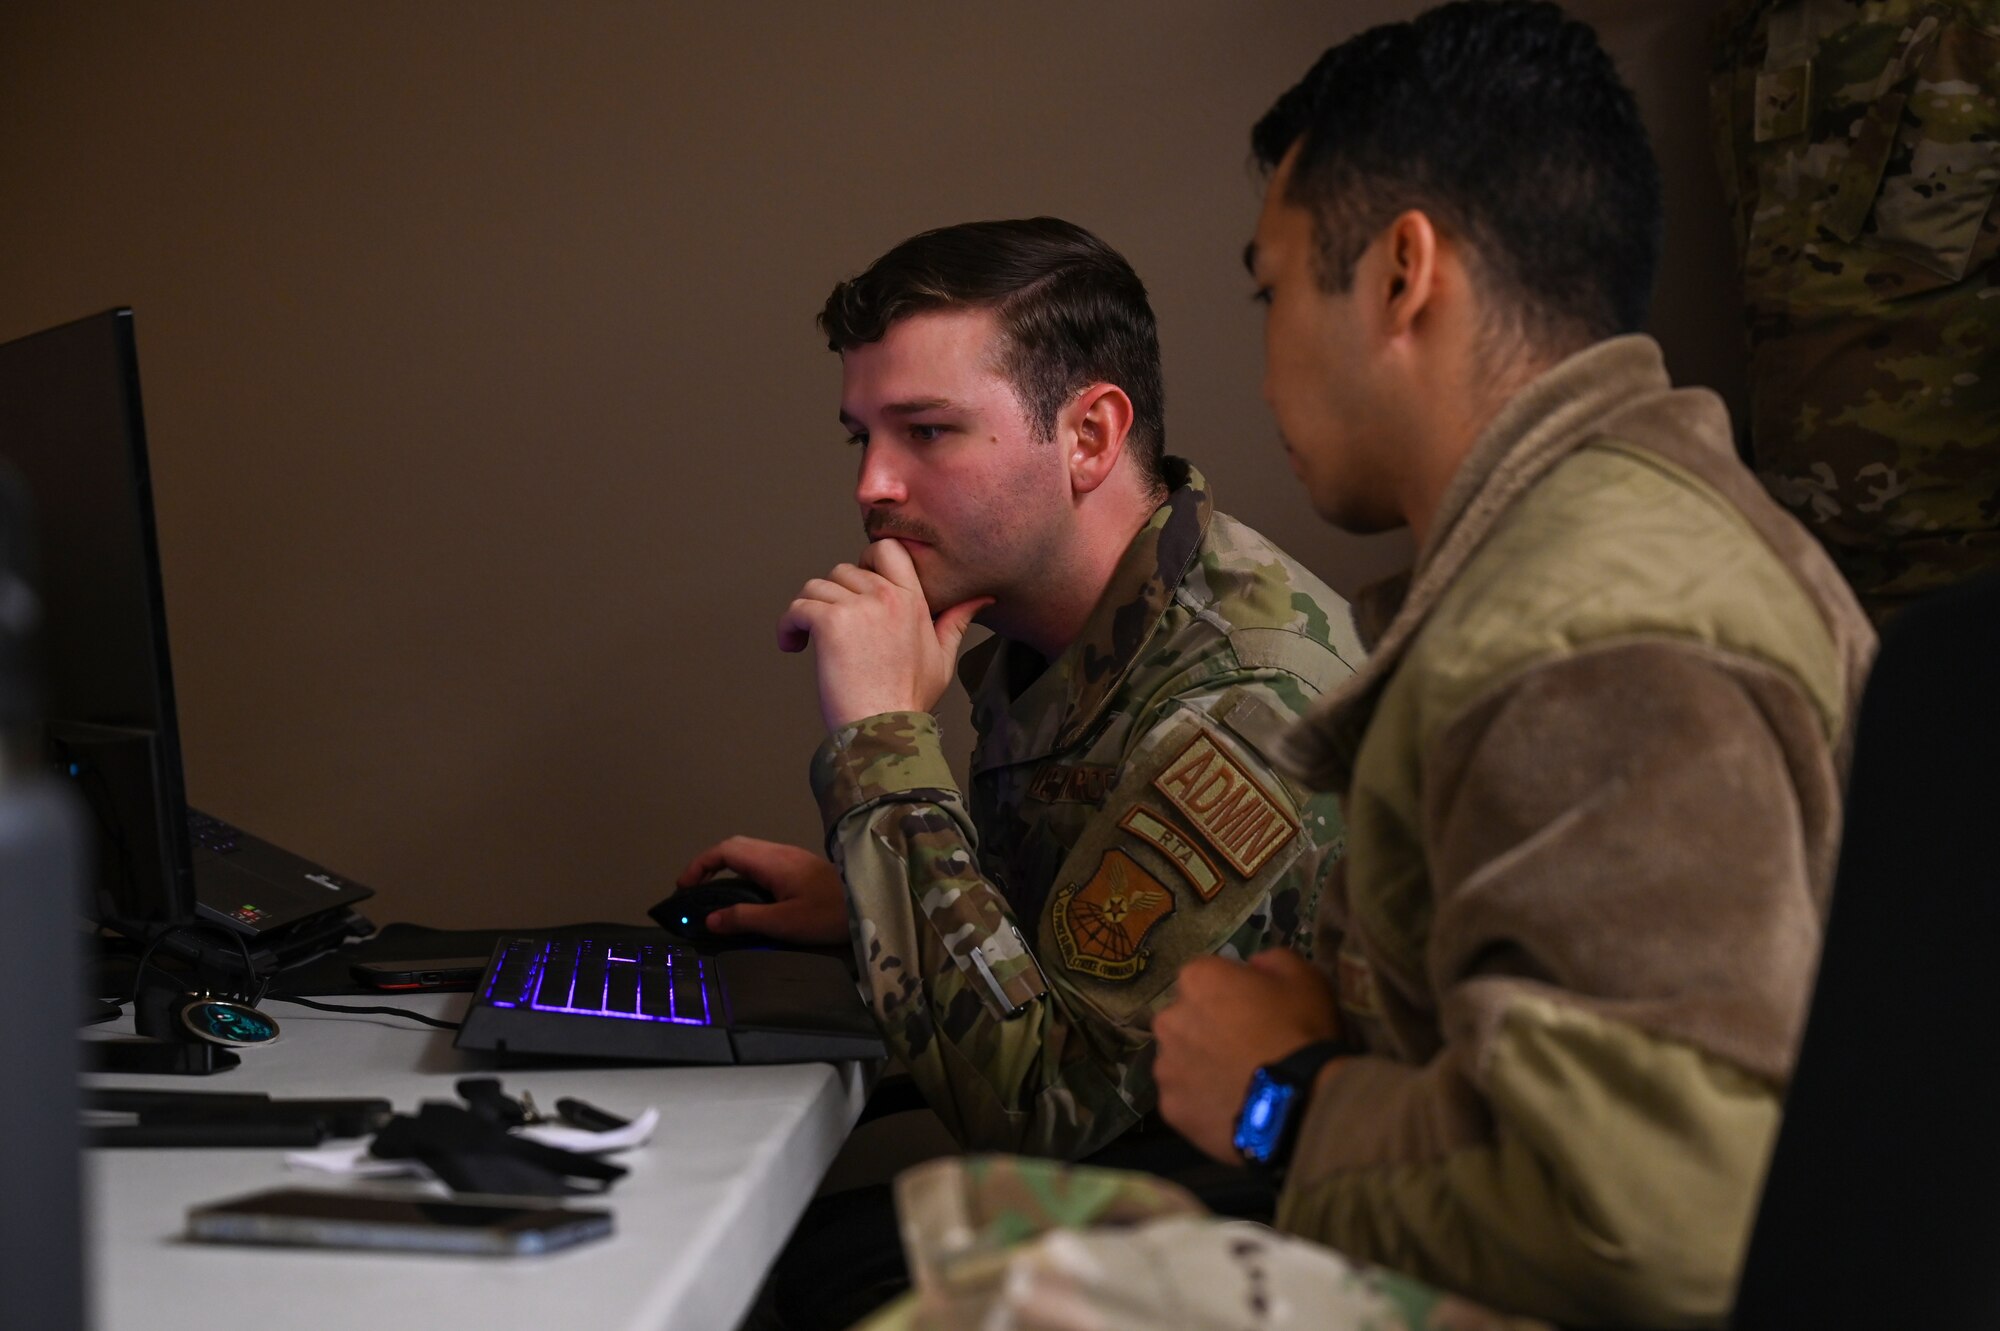 Staff Sgt. Dominic Emerson, 7th Communications Squadron administrative technician, troubleshoots an issue with server access during the Hackathon event on Dyess Air Force Base, Texas, Oct. 26, 2023. Participants set up servers and secured them during the first half of the event, then used various hacking techniques and exploits to break into them. (U.S. Air Force photo by Senior Airman Sophia Robello)